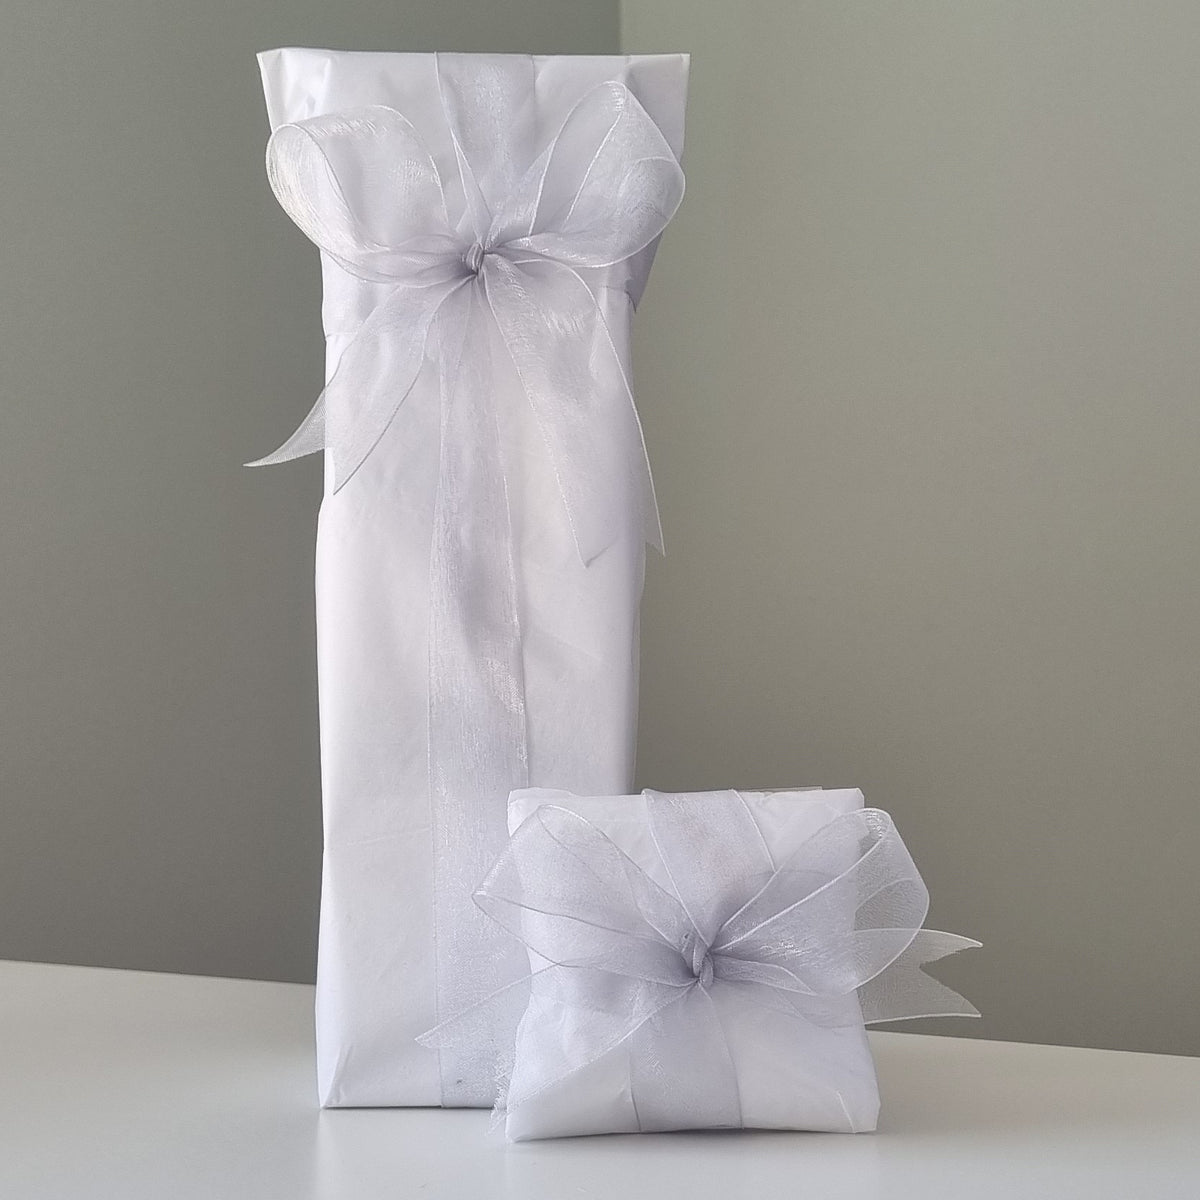 Gift wrapping - white tissue paper with silver ribbon & bow